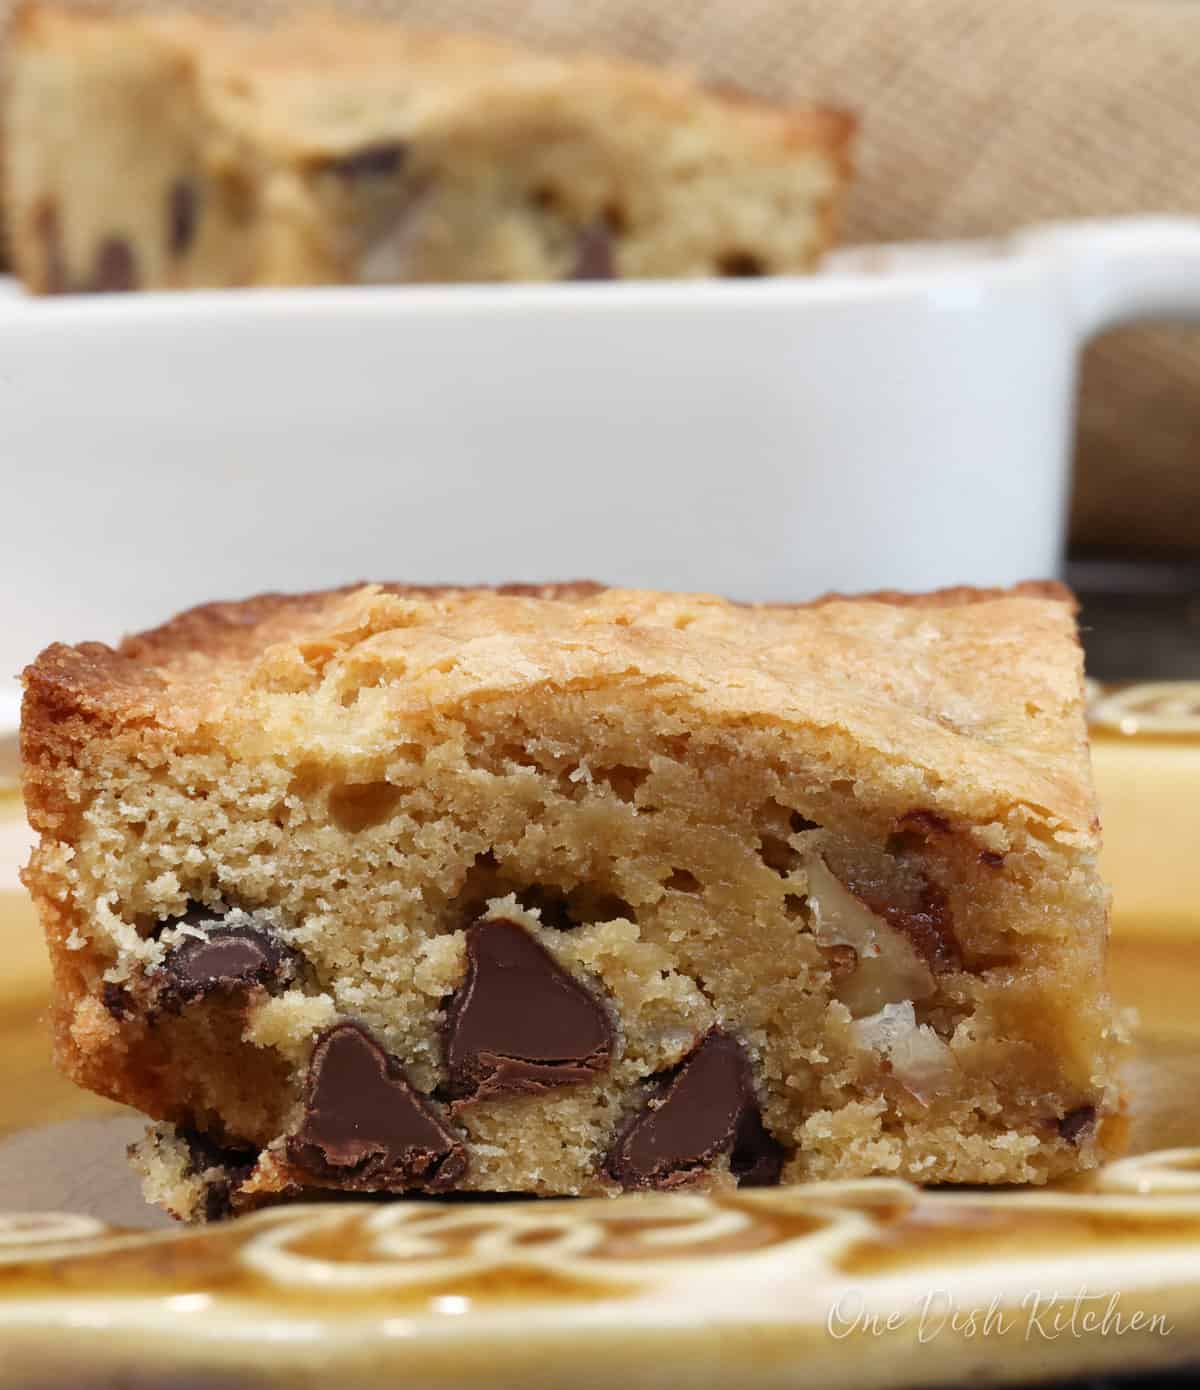 one chocolate chip blondie on a plate next to a bowl of the remaining blondies.